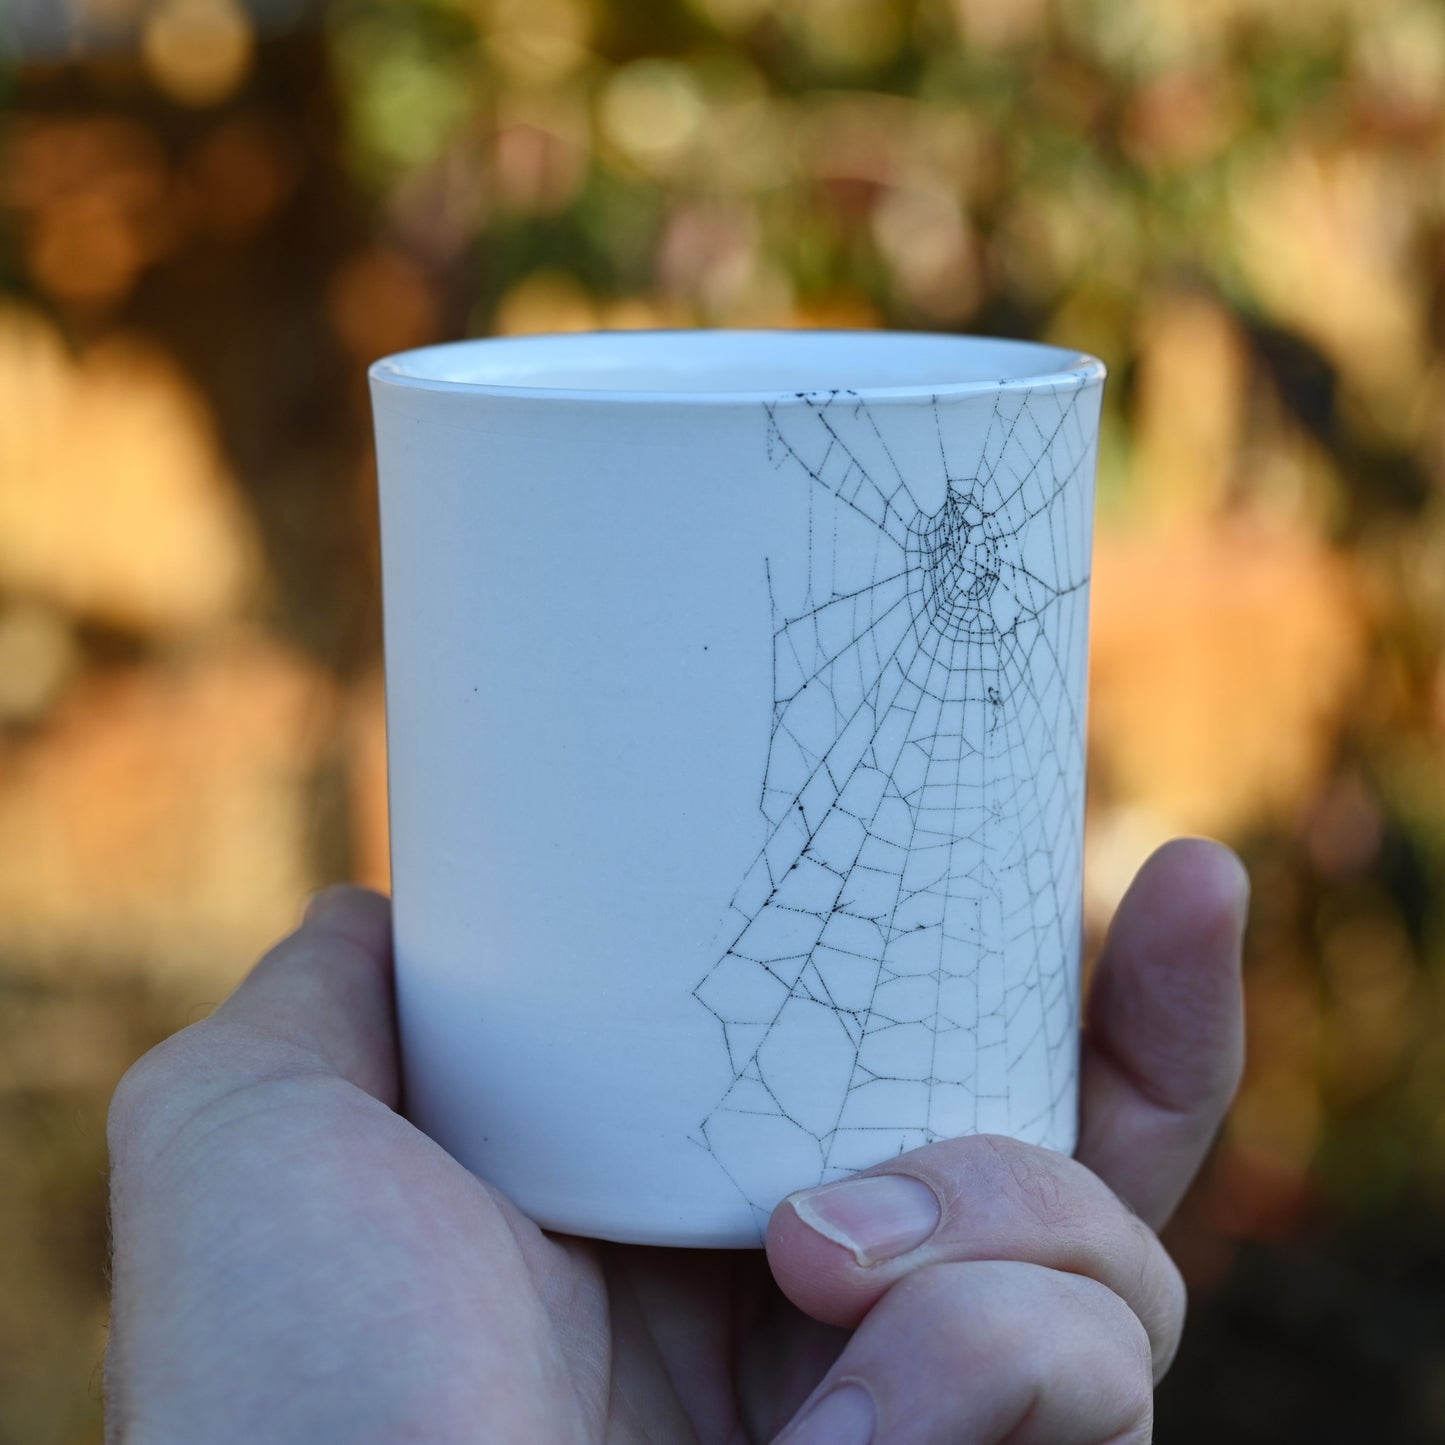 Web on Clay (160), Collected September 12, 2022